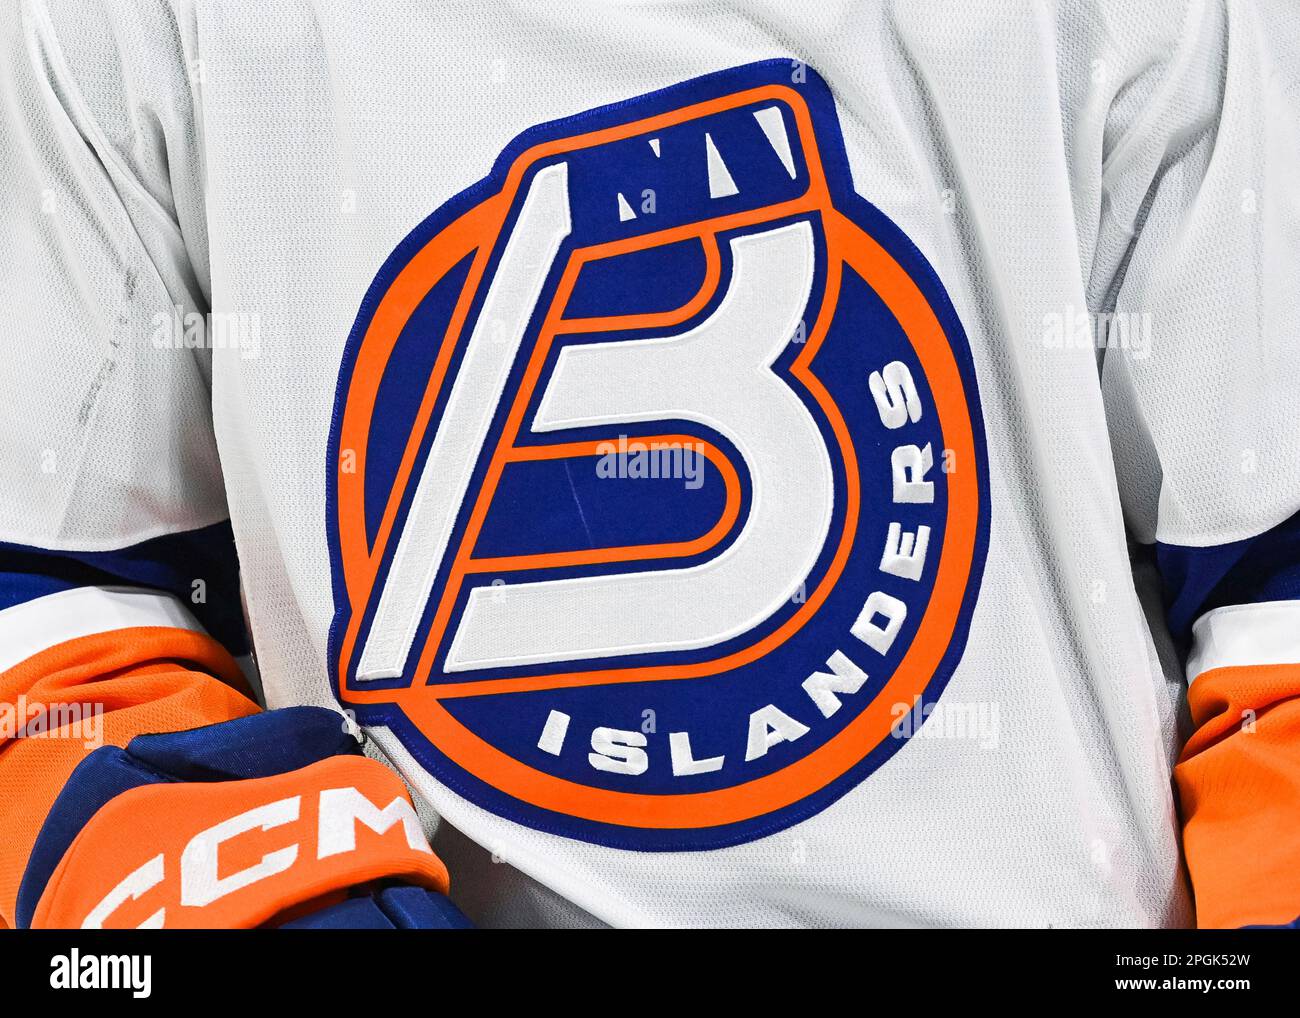 LAVAL, QC - MARCH 22: View of a Laval Rocket logo on a jersey worn